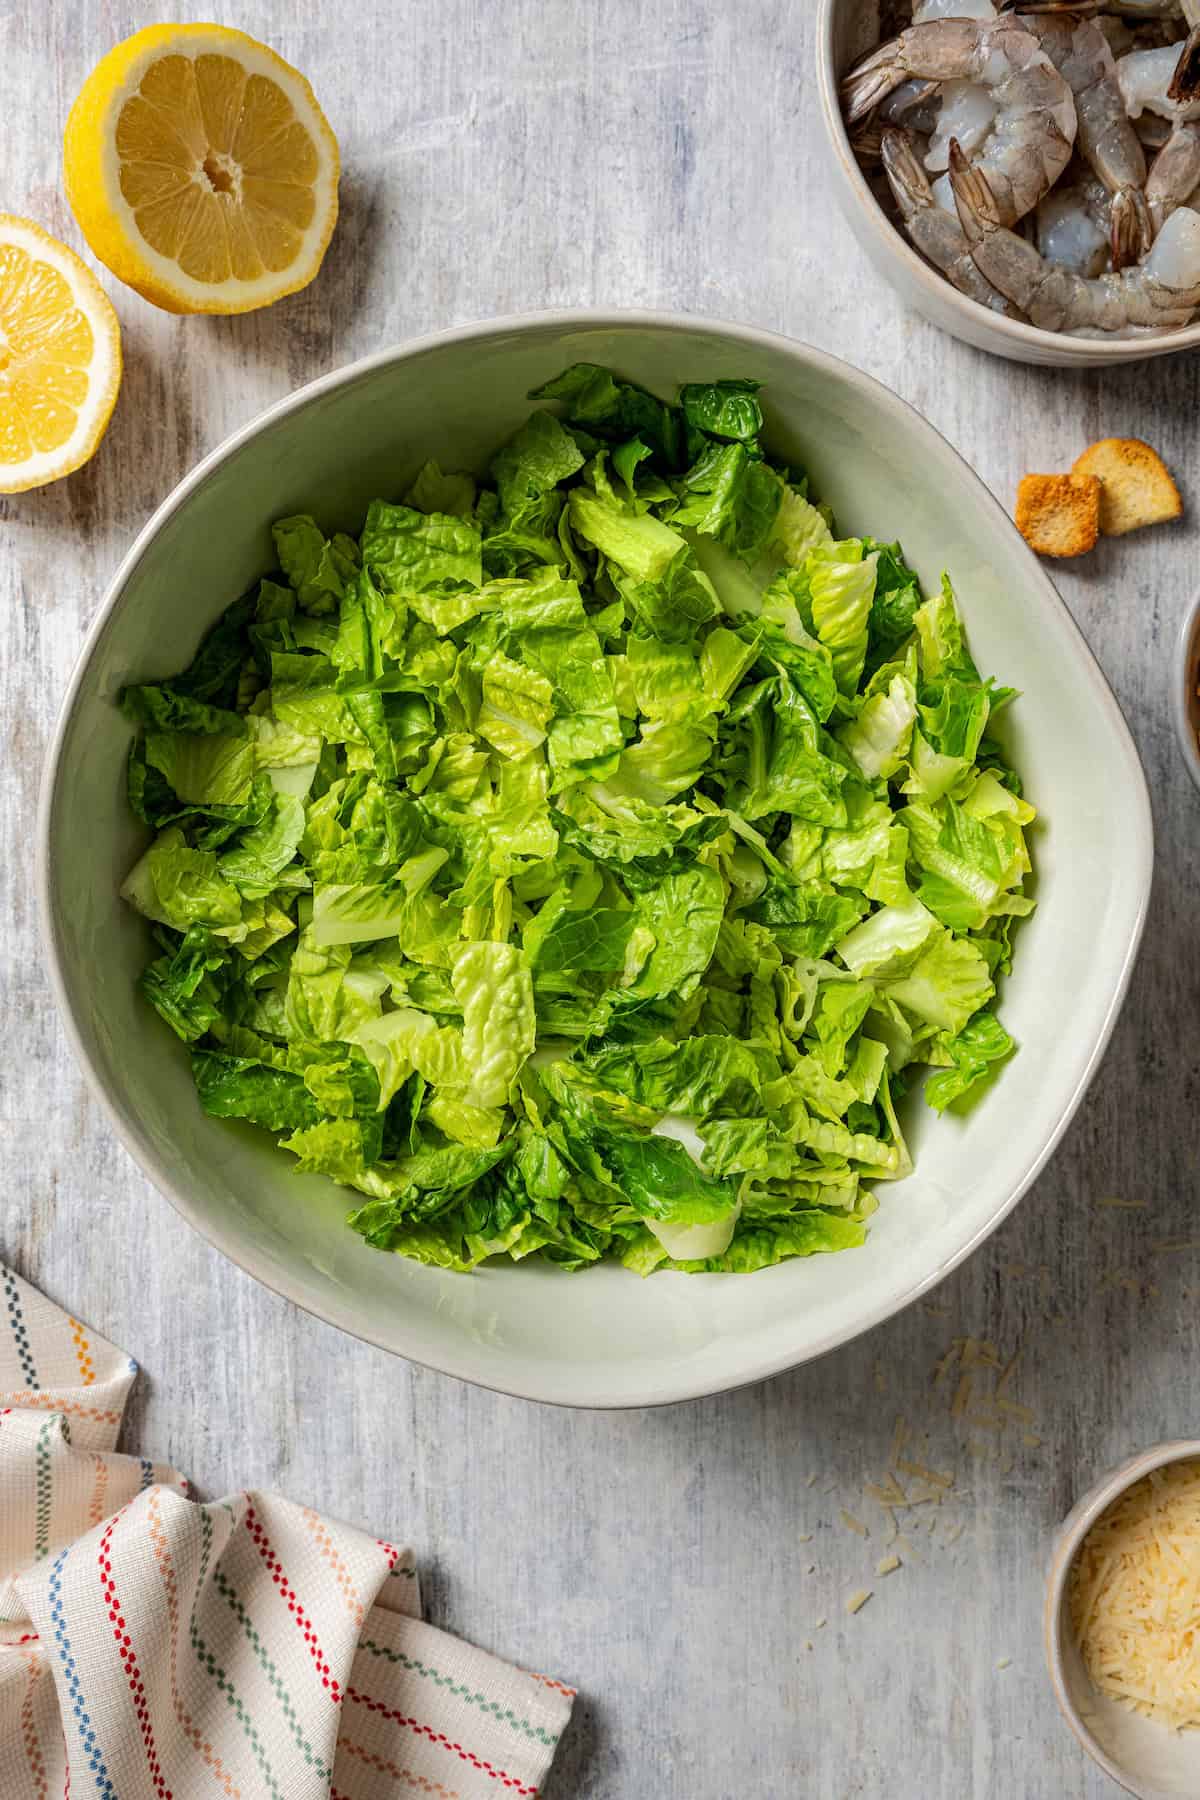 Romaine lettuce in a large salad bowl.